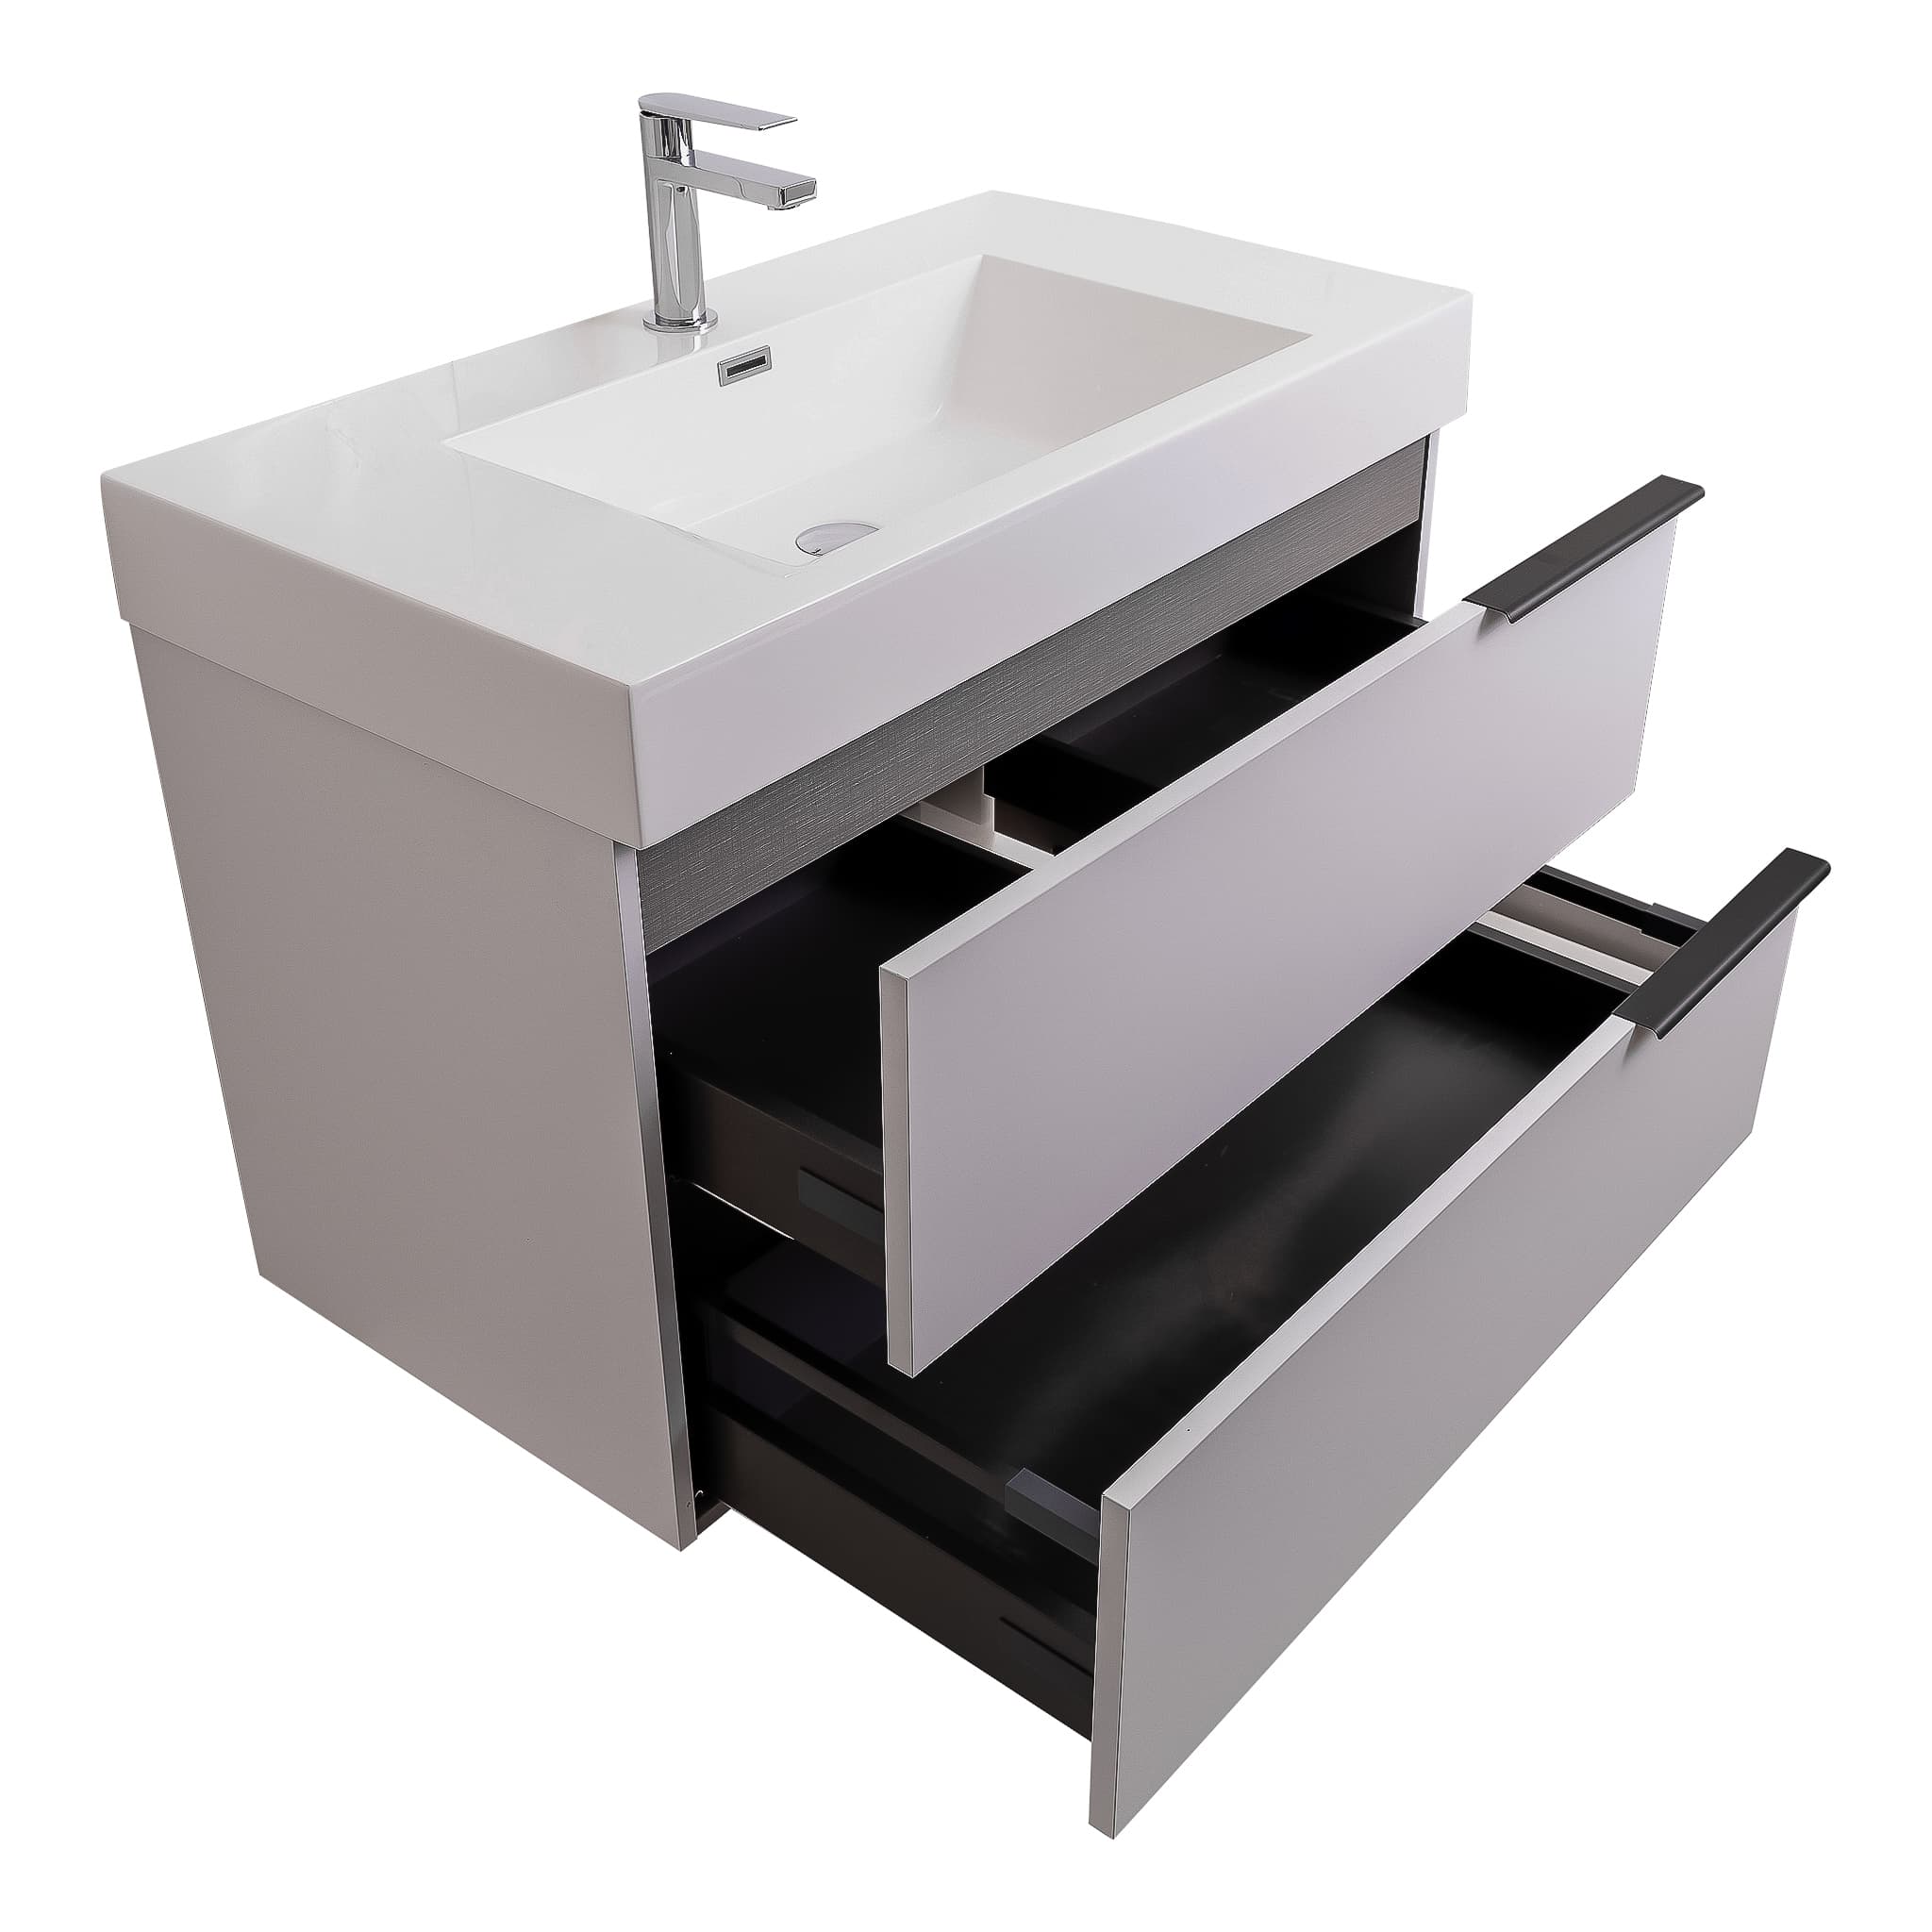 Mallorca 39.5 Matte White Cabinet, Square Cultured Marble Sink, Wall Mounted Modern Vanity Set